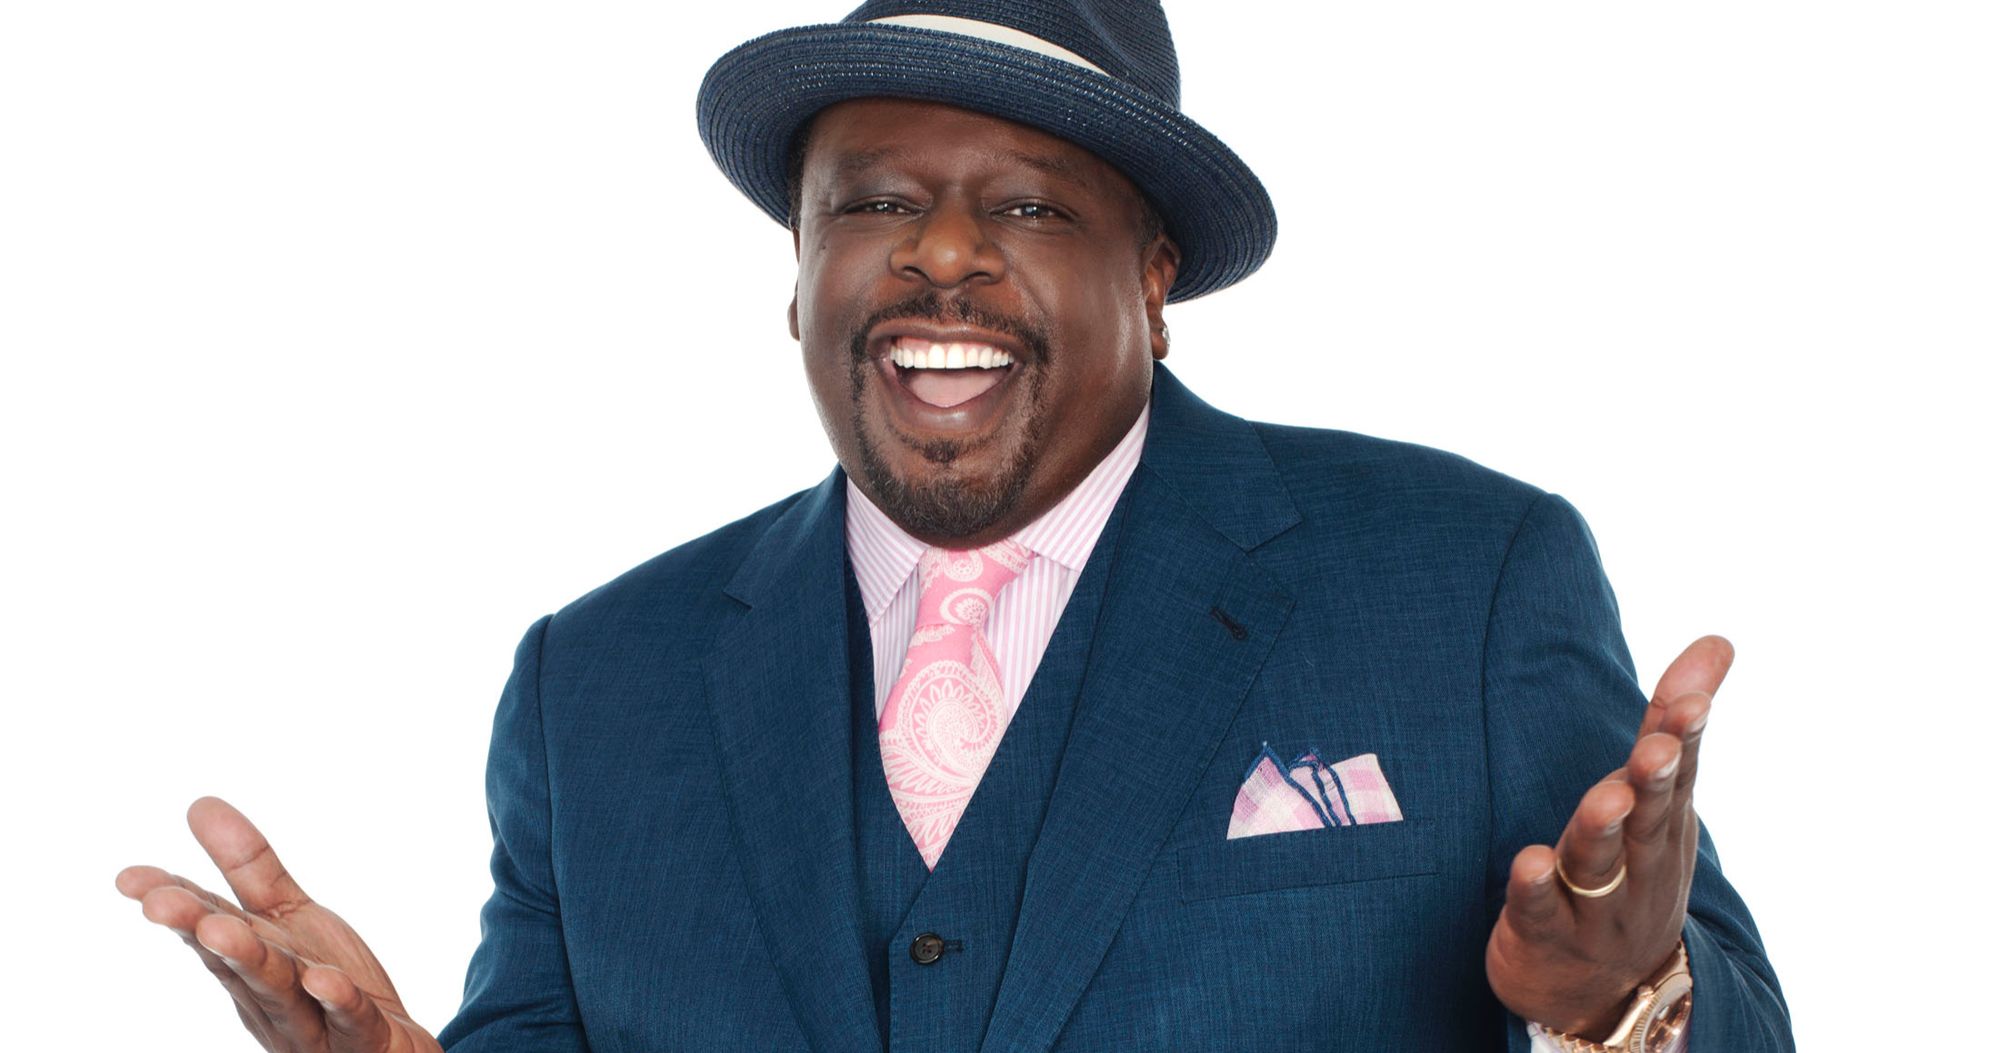 Cedric the Entertainer to Host Stay-At-Home Viral Video Special on CBS